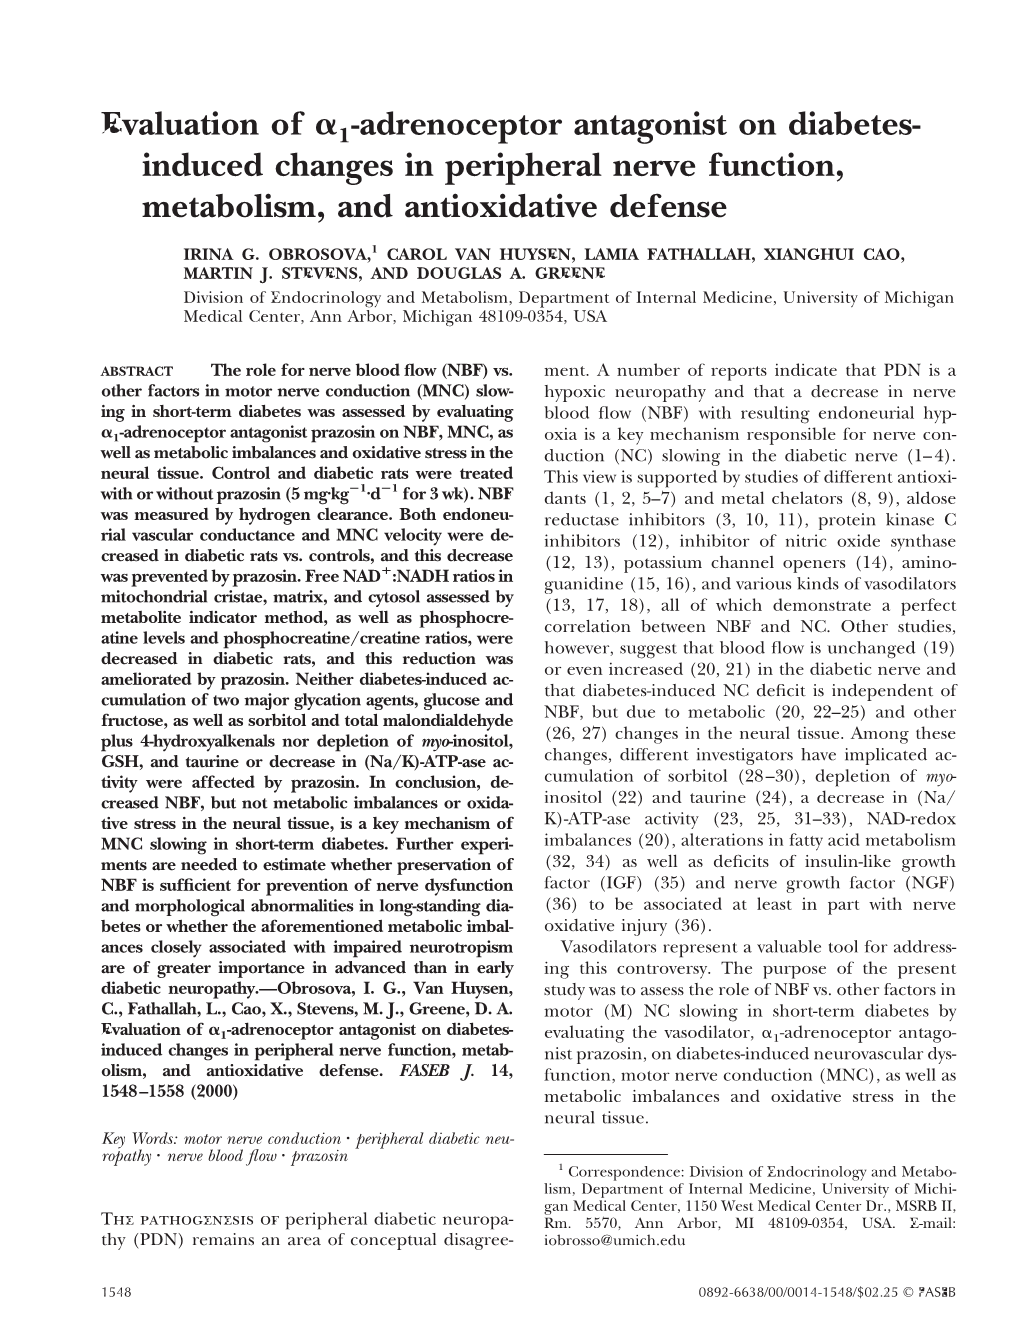 Evaluation of 1-Adrenoceptor Antagonist on Diabetes- Induced Changes in Peripheral Nerve Function, Metabolism, and Antioxidative Defense